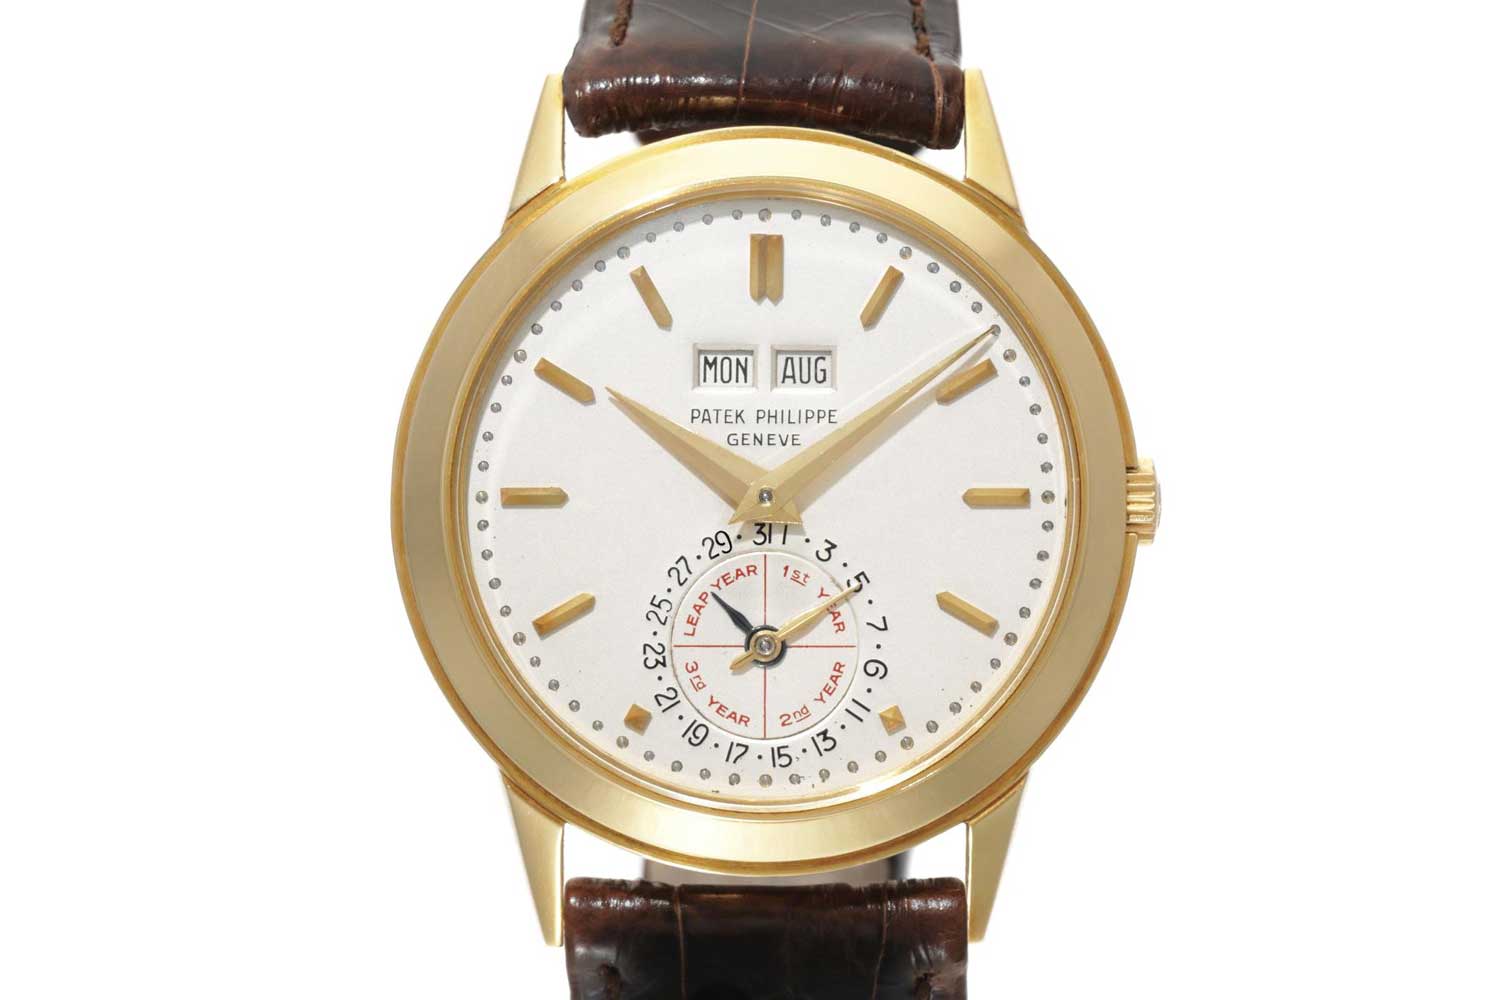 Unique ref. 3448 with leap year in place of moon phase